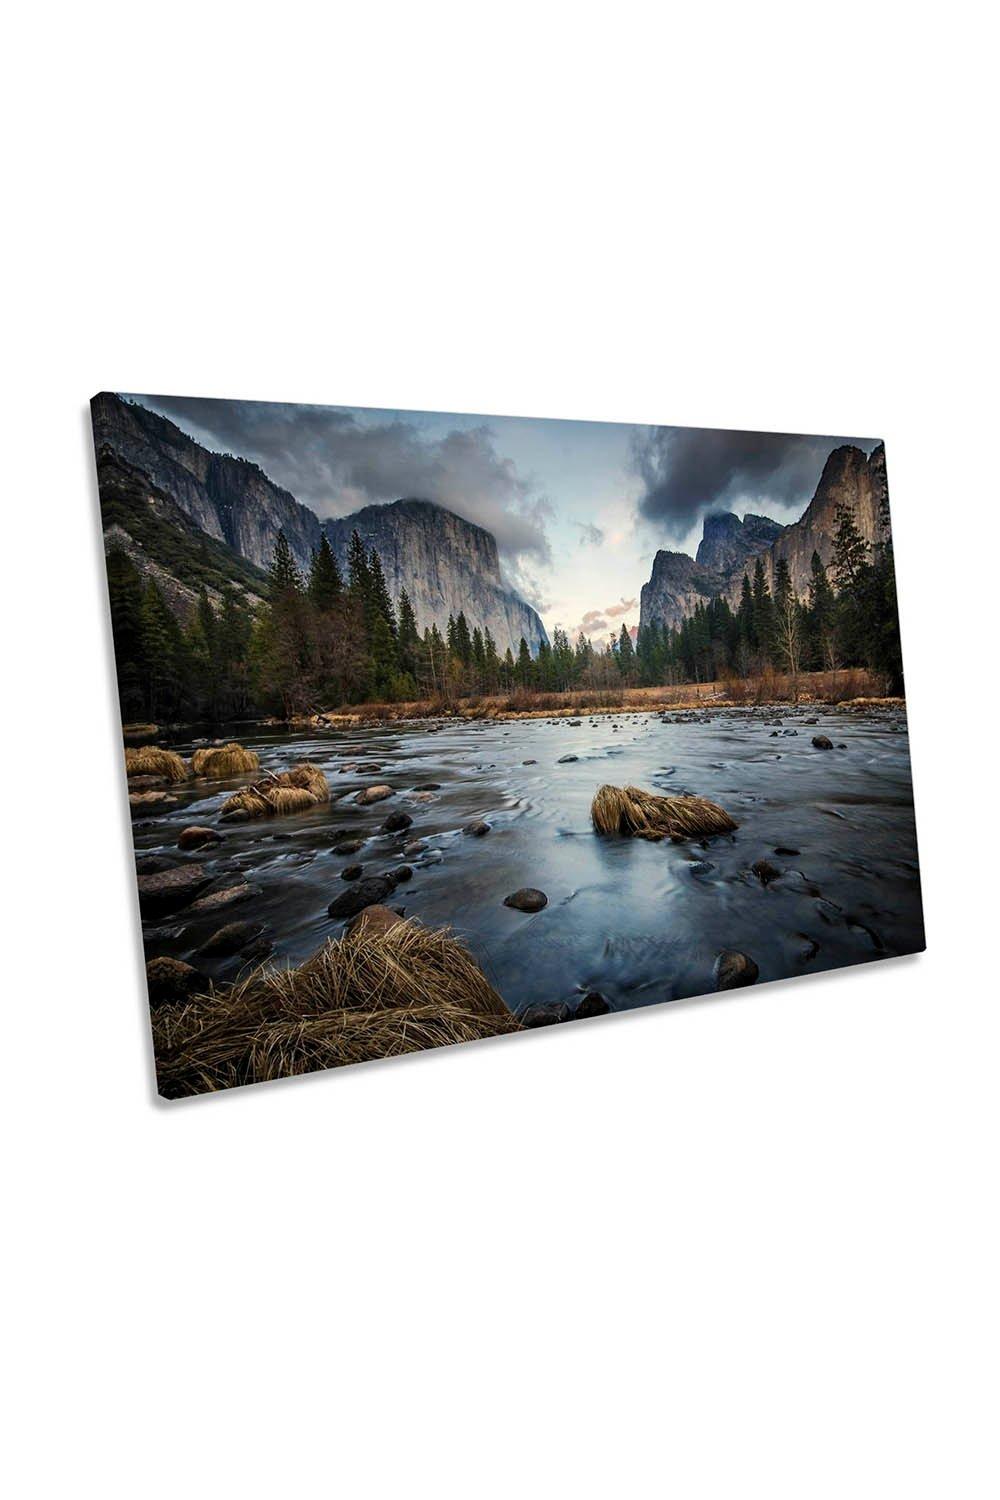 The Dark Flow Yosemite Valley Canvas Wall Art Picture Print